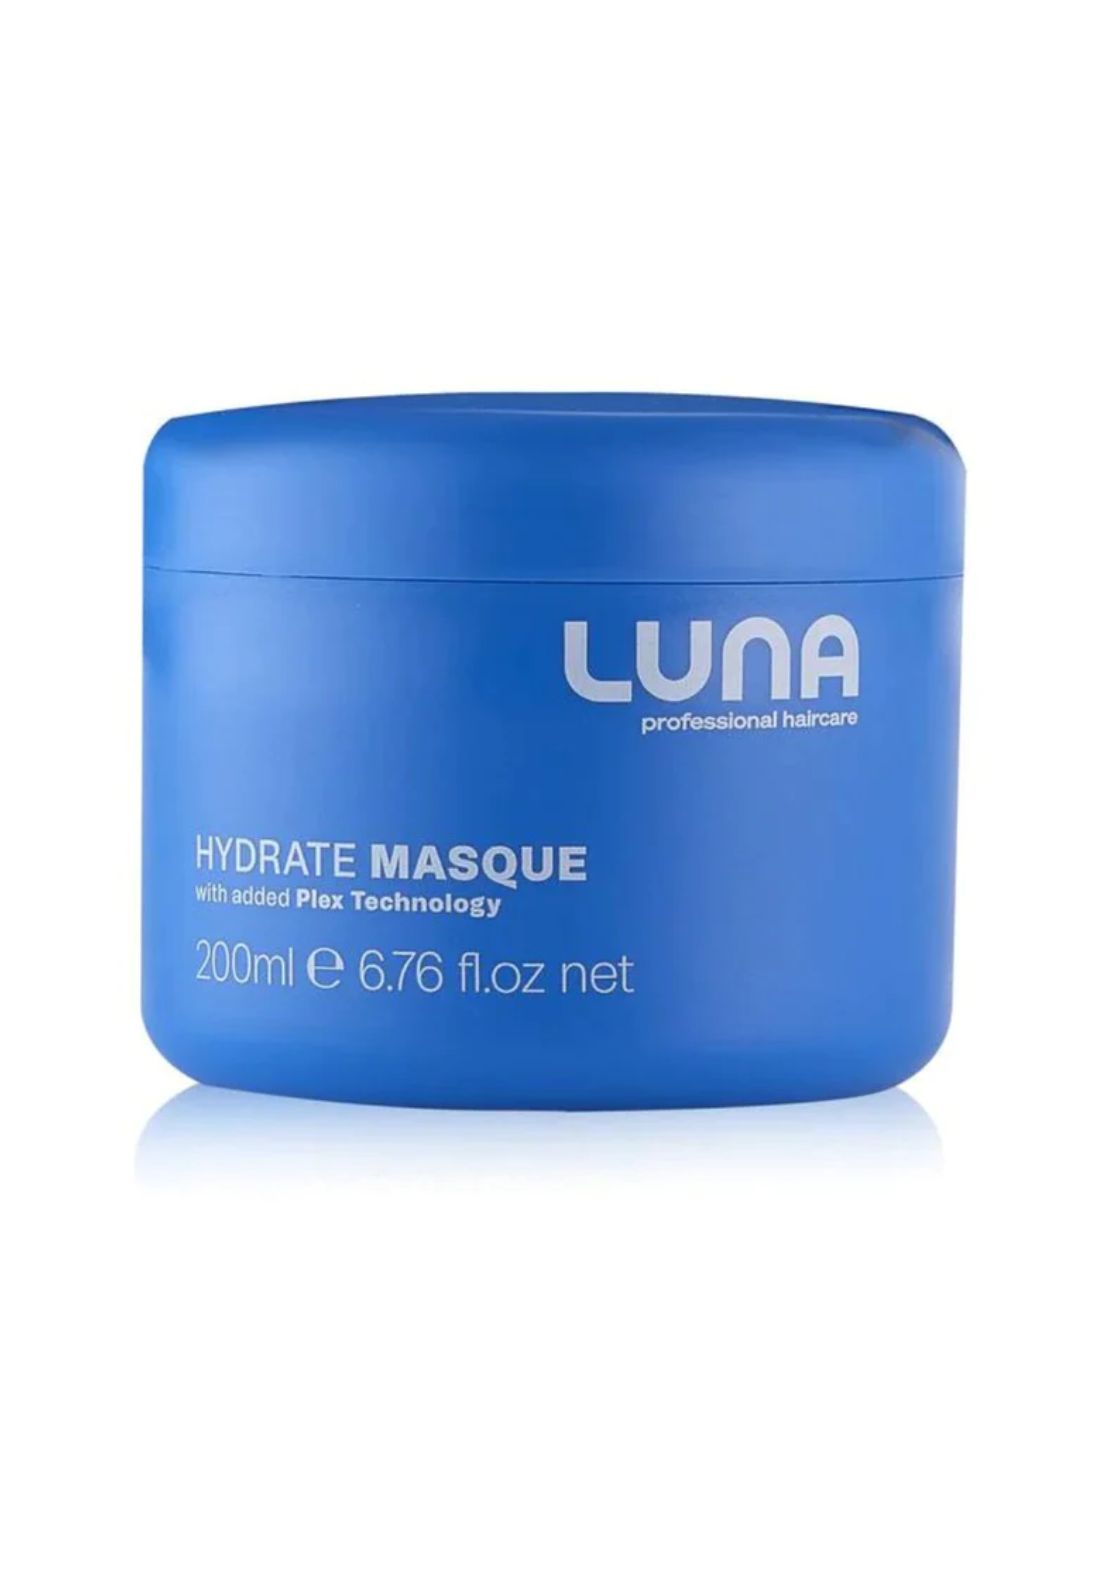 Luna By Lisa Professional Hydrate Masque 1 Shaws Department Stores